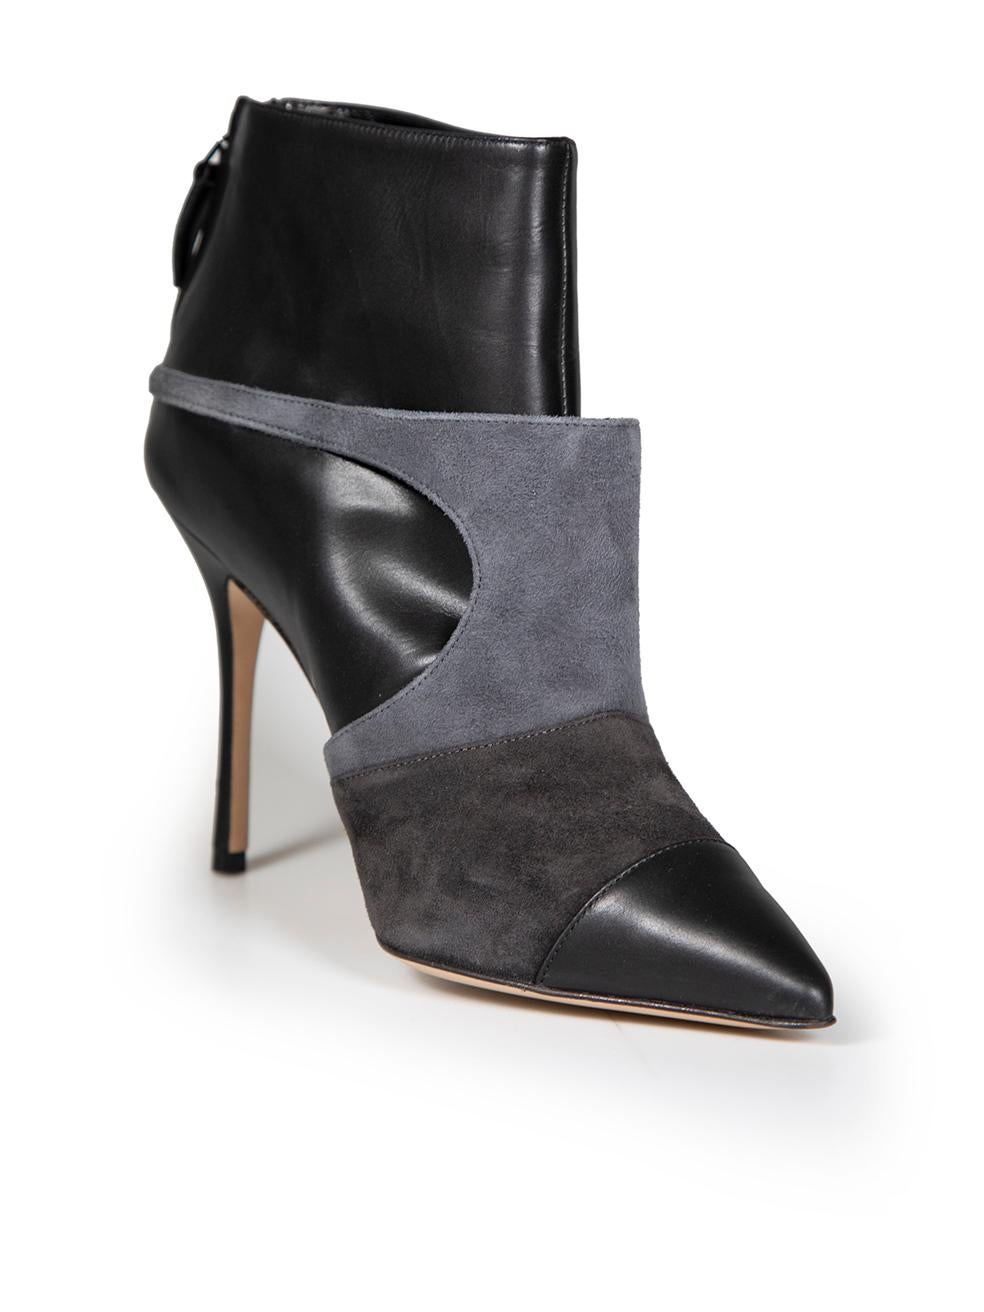 CONDITION is Very good. Minimal wear to boots is evident. Minimal wear to soles on this used Manolo Blahnik designer resale item. These shoes come with original box and dust bag.
 
 
 
 Details
 
 
 Black
 
 Leather
 
 Ankle boots
 
 Grey suede